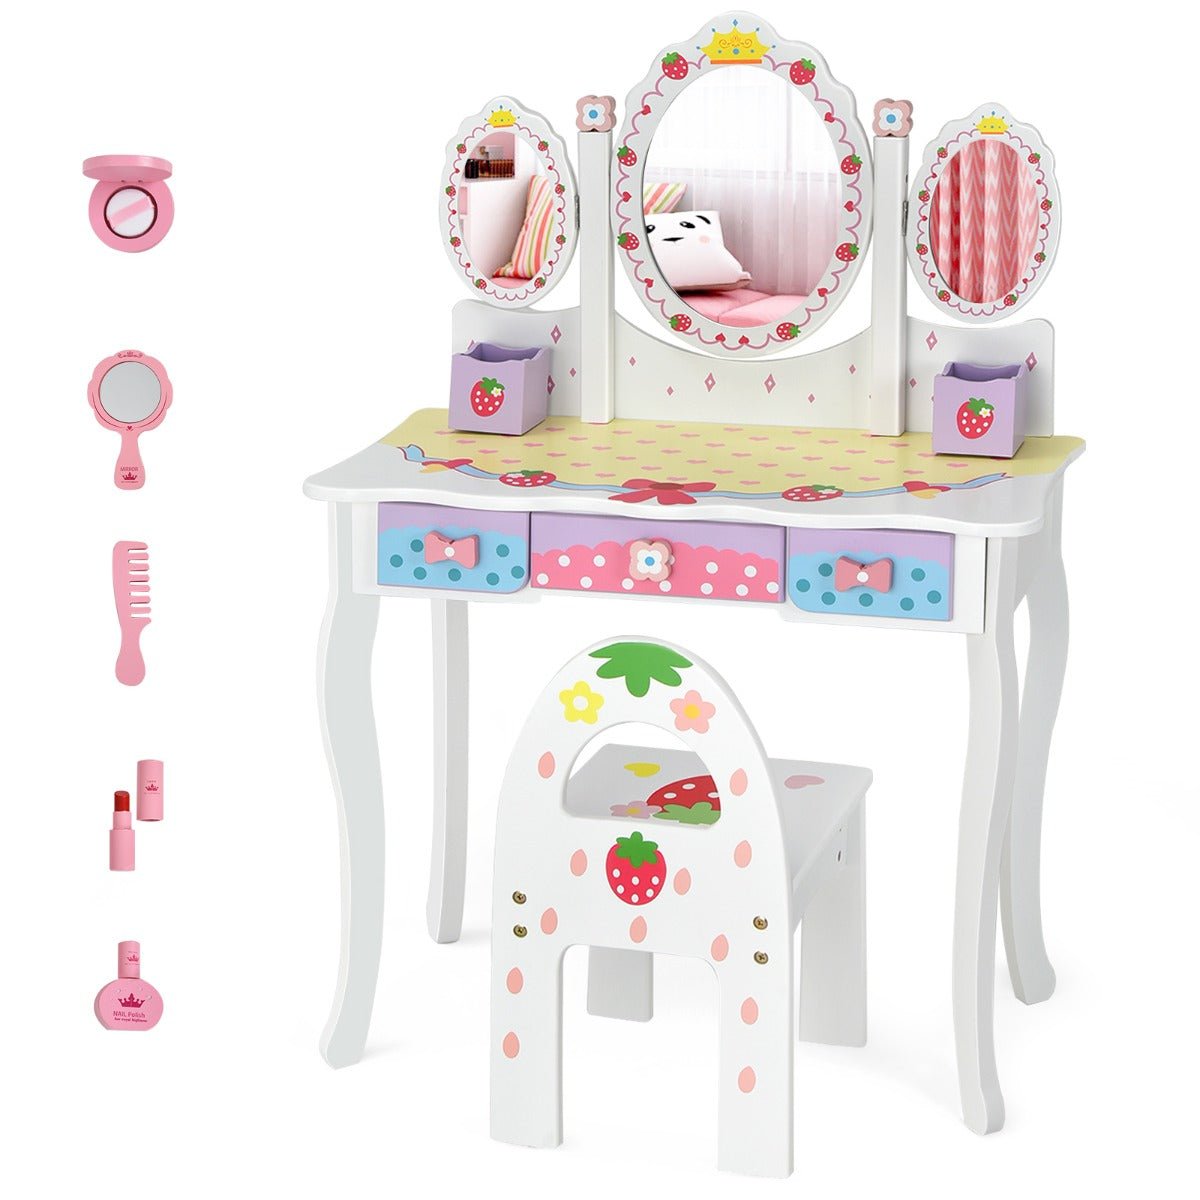 Princess Vanity Table Set with 360° Rotating Mirror for Kids - White Elegance